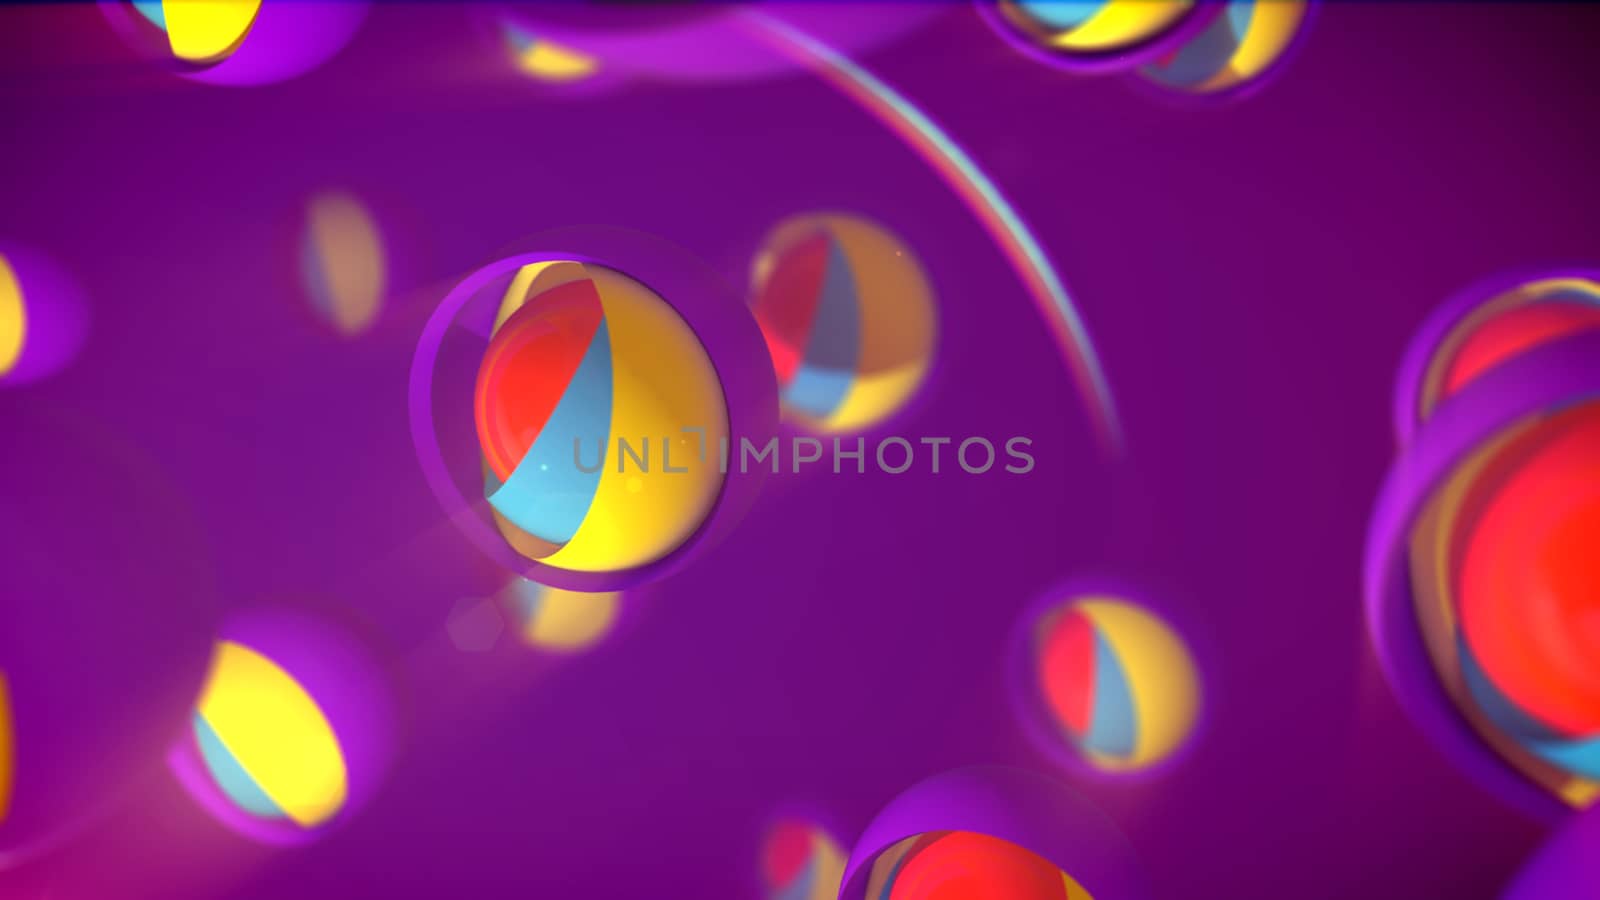 An innovative 3d illustration of nested camera objects of rainbow colors placed in large semi-spheres with shutters in the violet backdrop. They form the mood of happiness, innovation and joy.